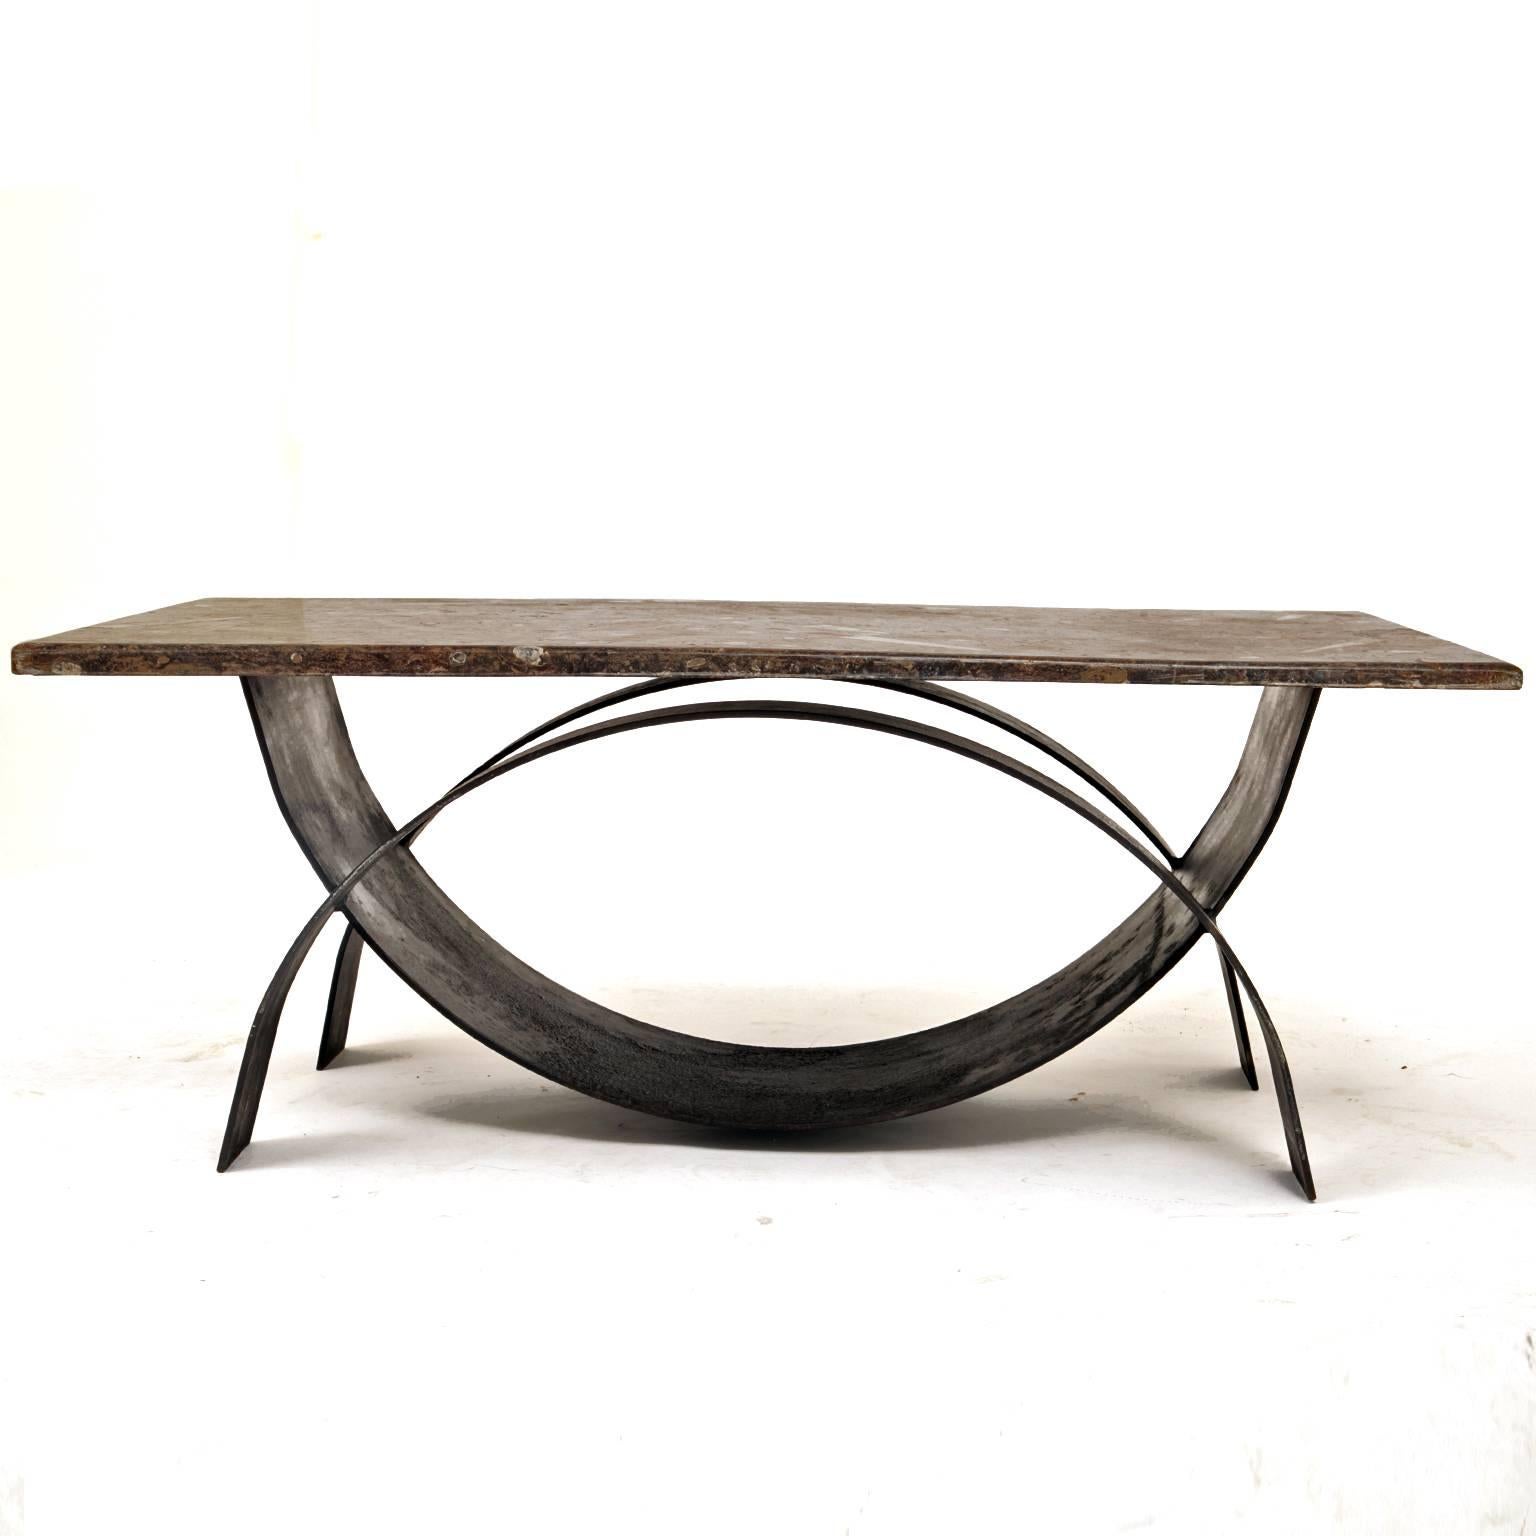 Modernist coffee table with a bent iron frame and a tabletop out of fossil stone.